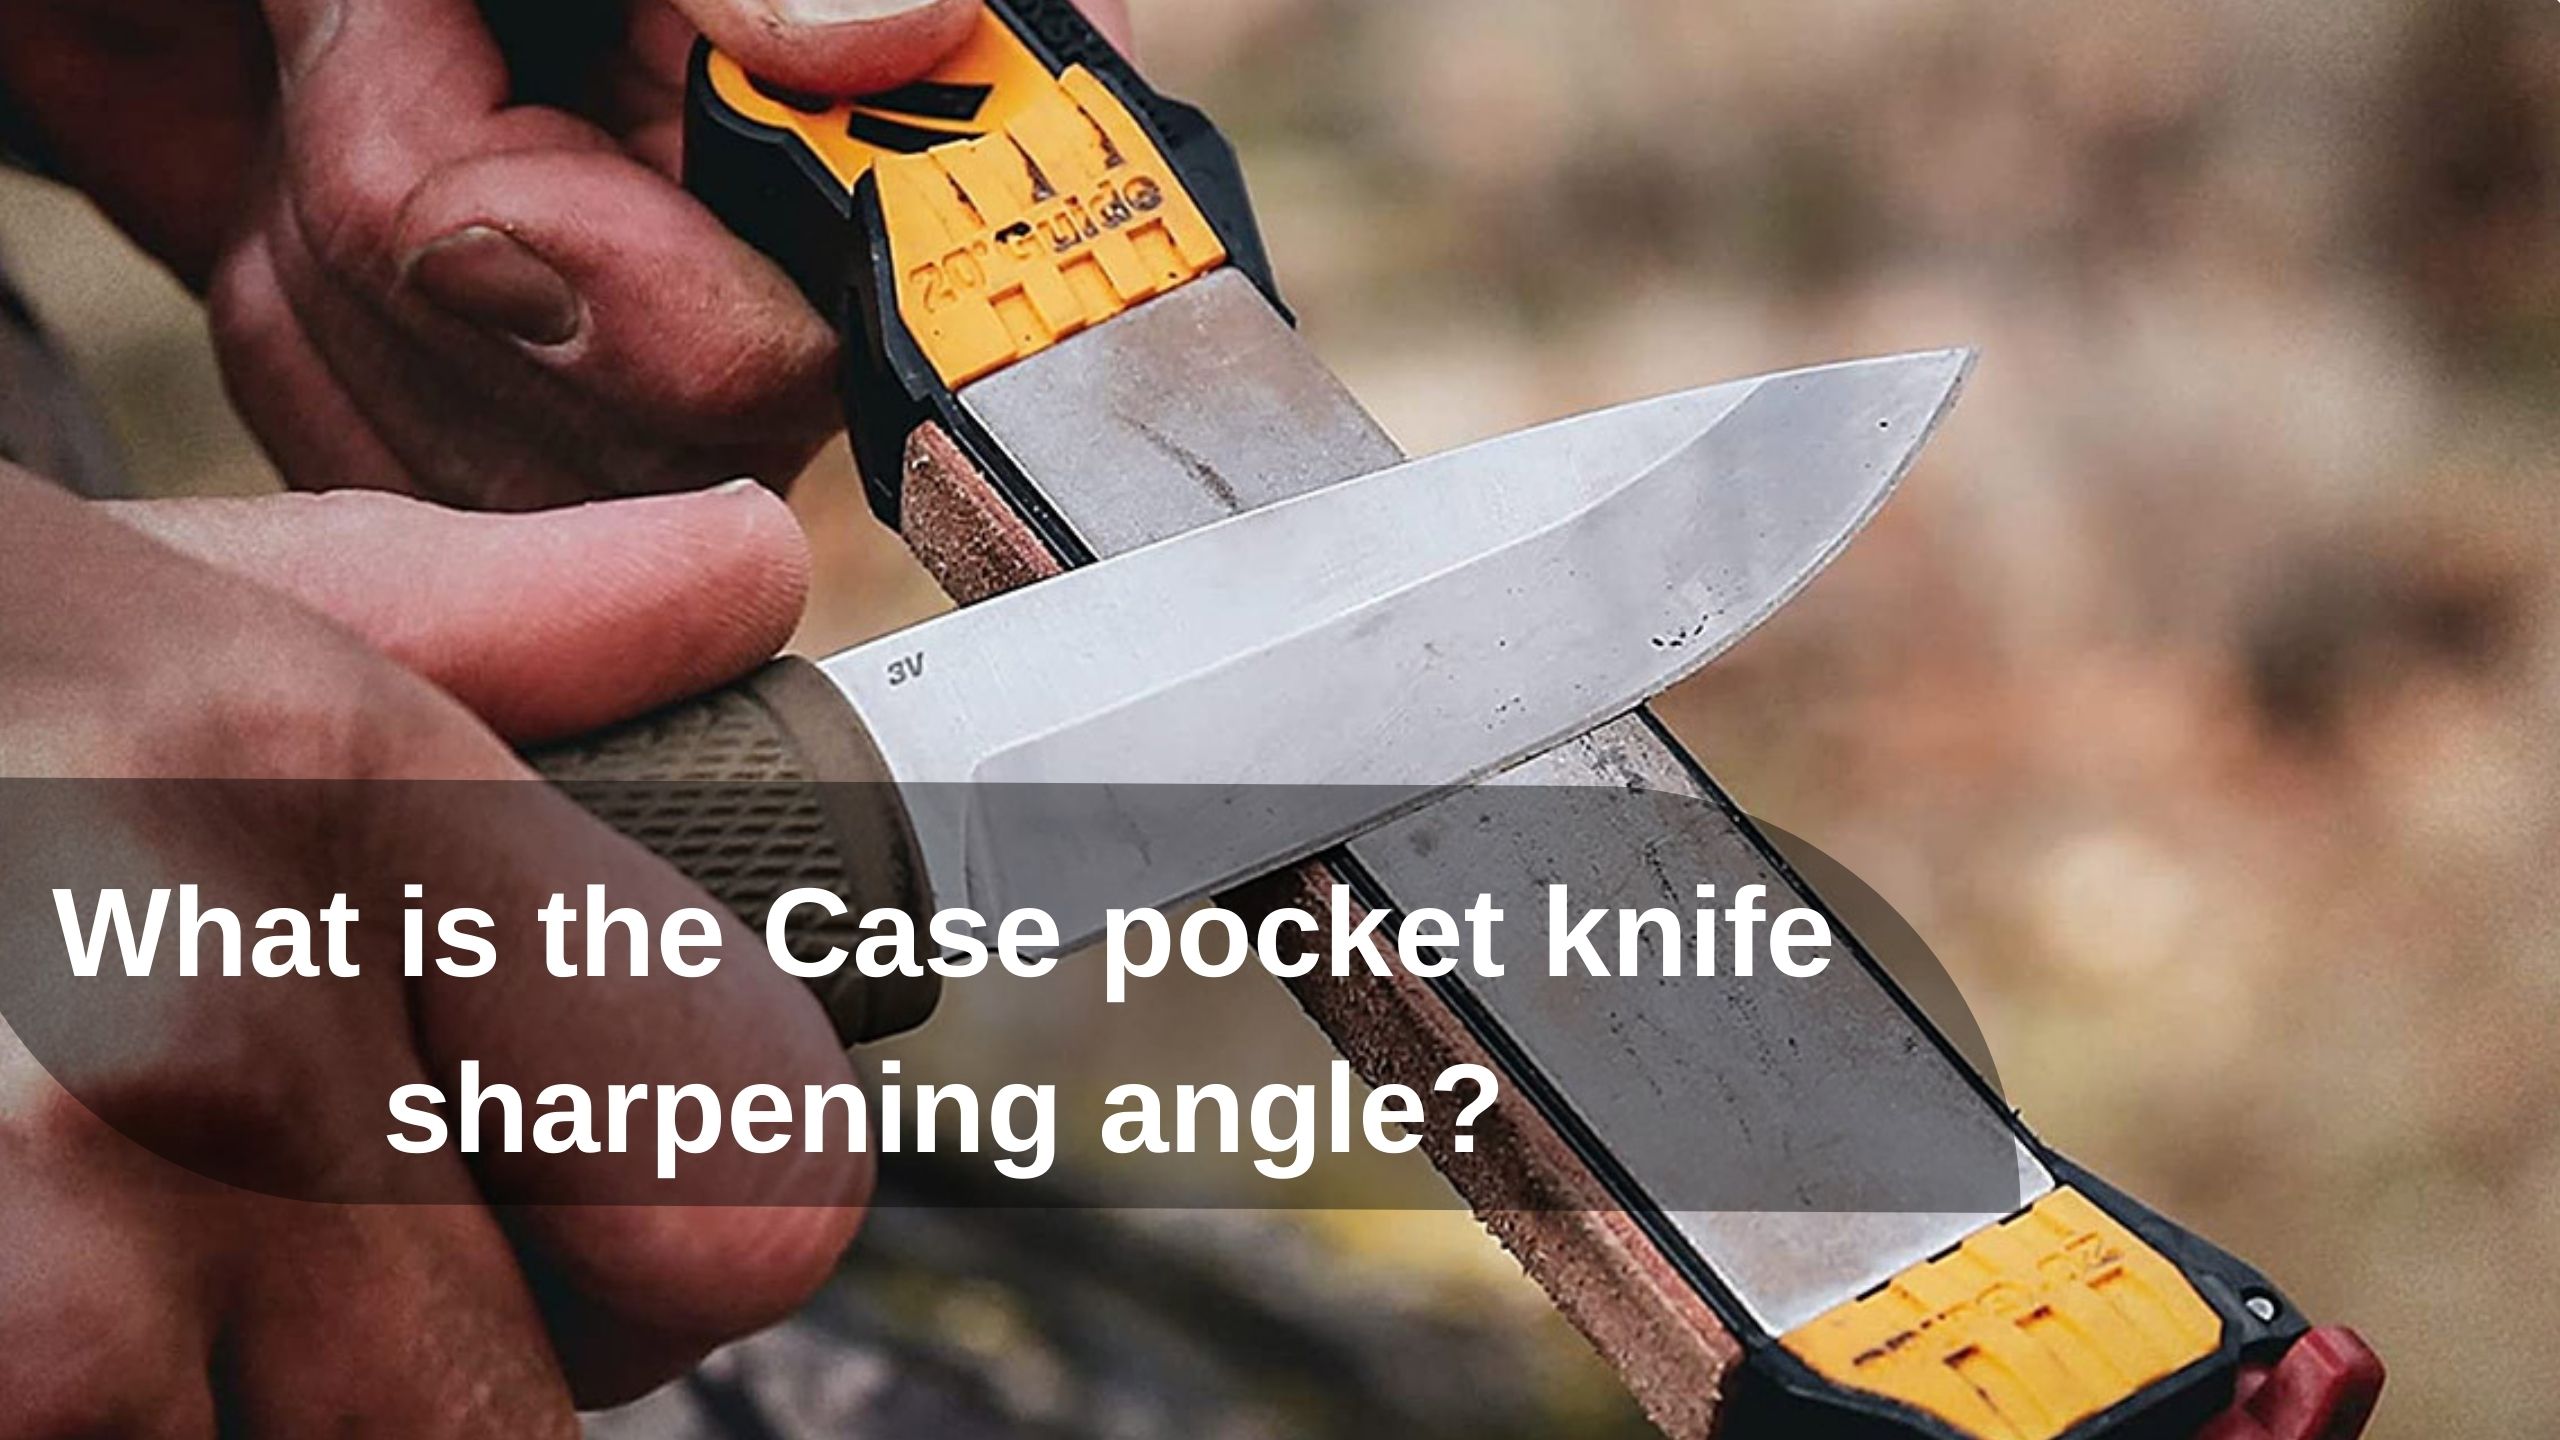 What is the Case pocket knife sharpening angle?